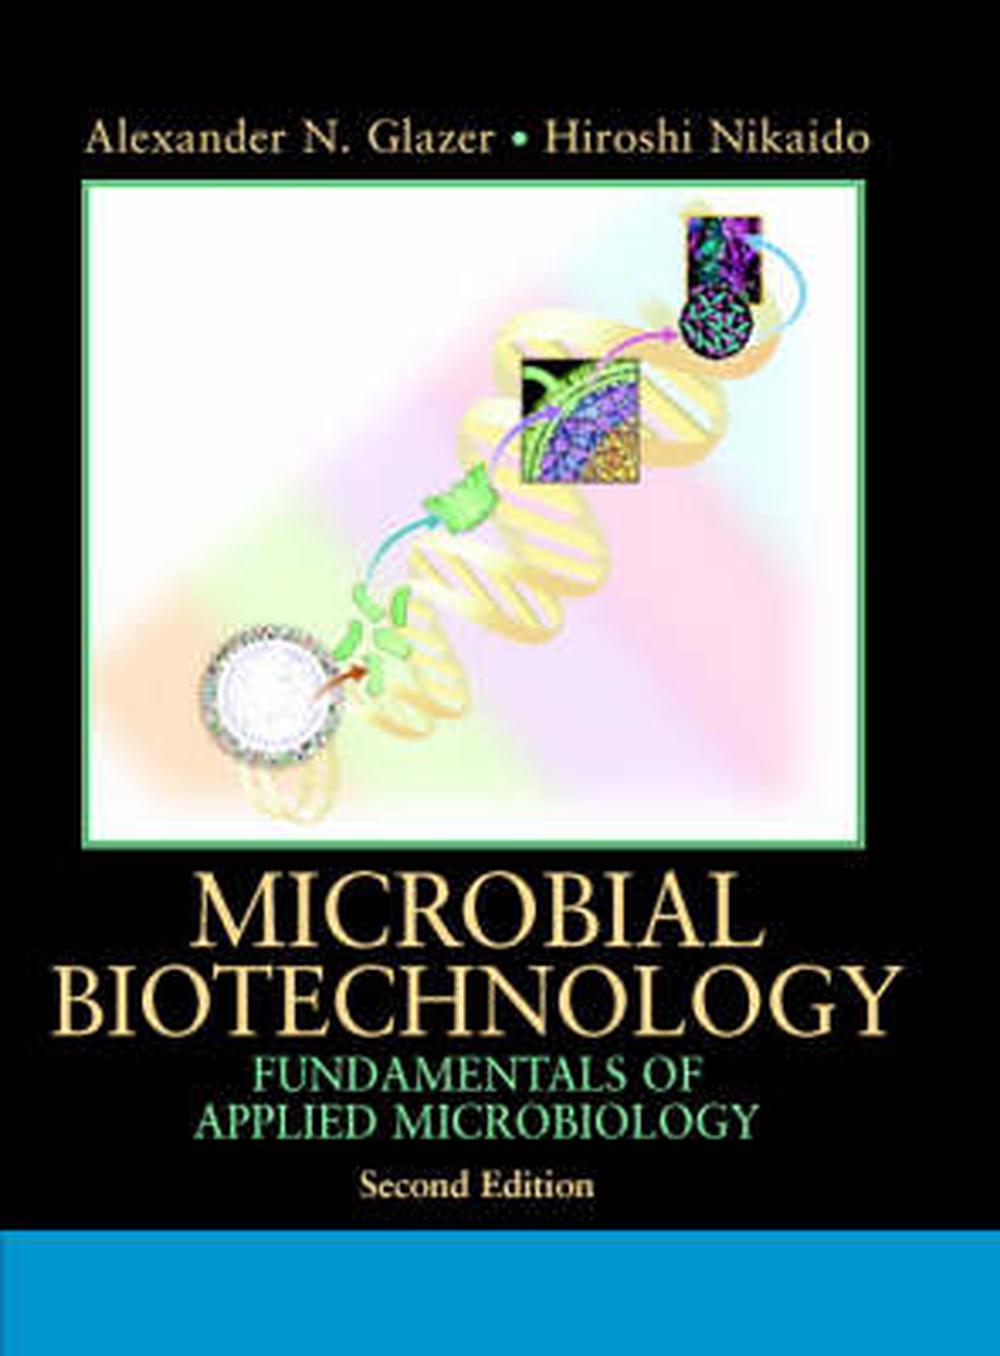 Microbial Biotechnology Fundamentals of Applied Microbiology by